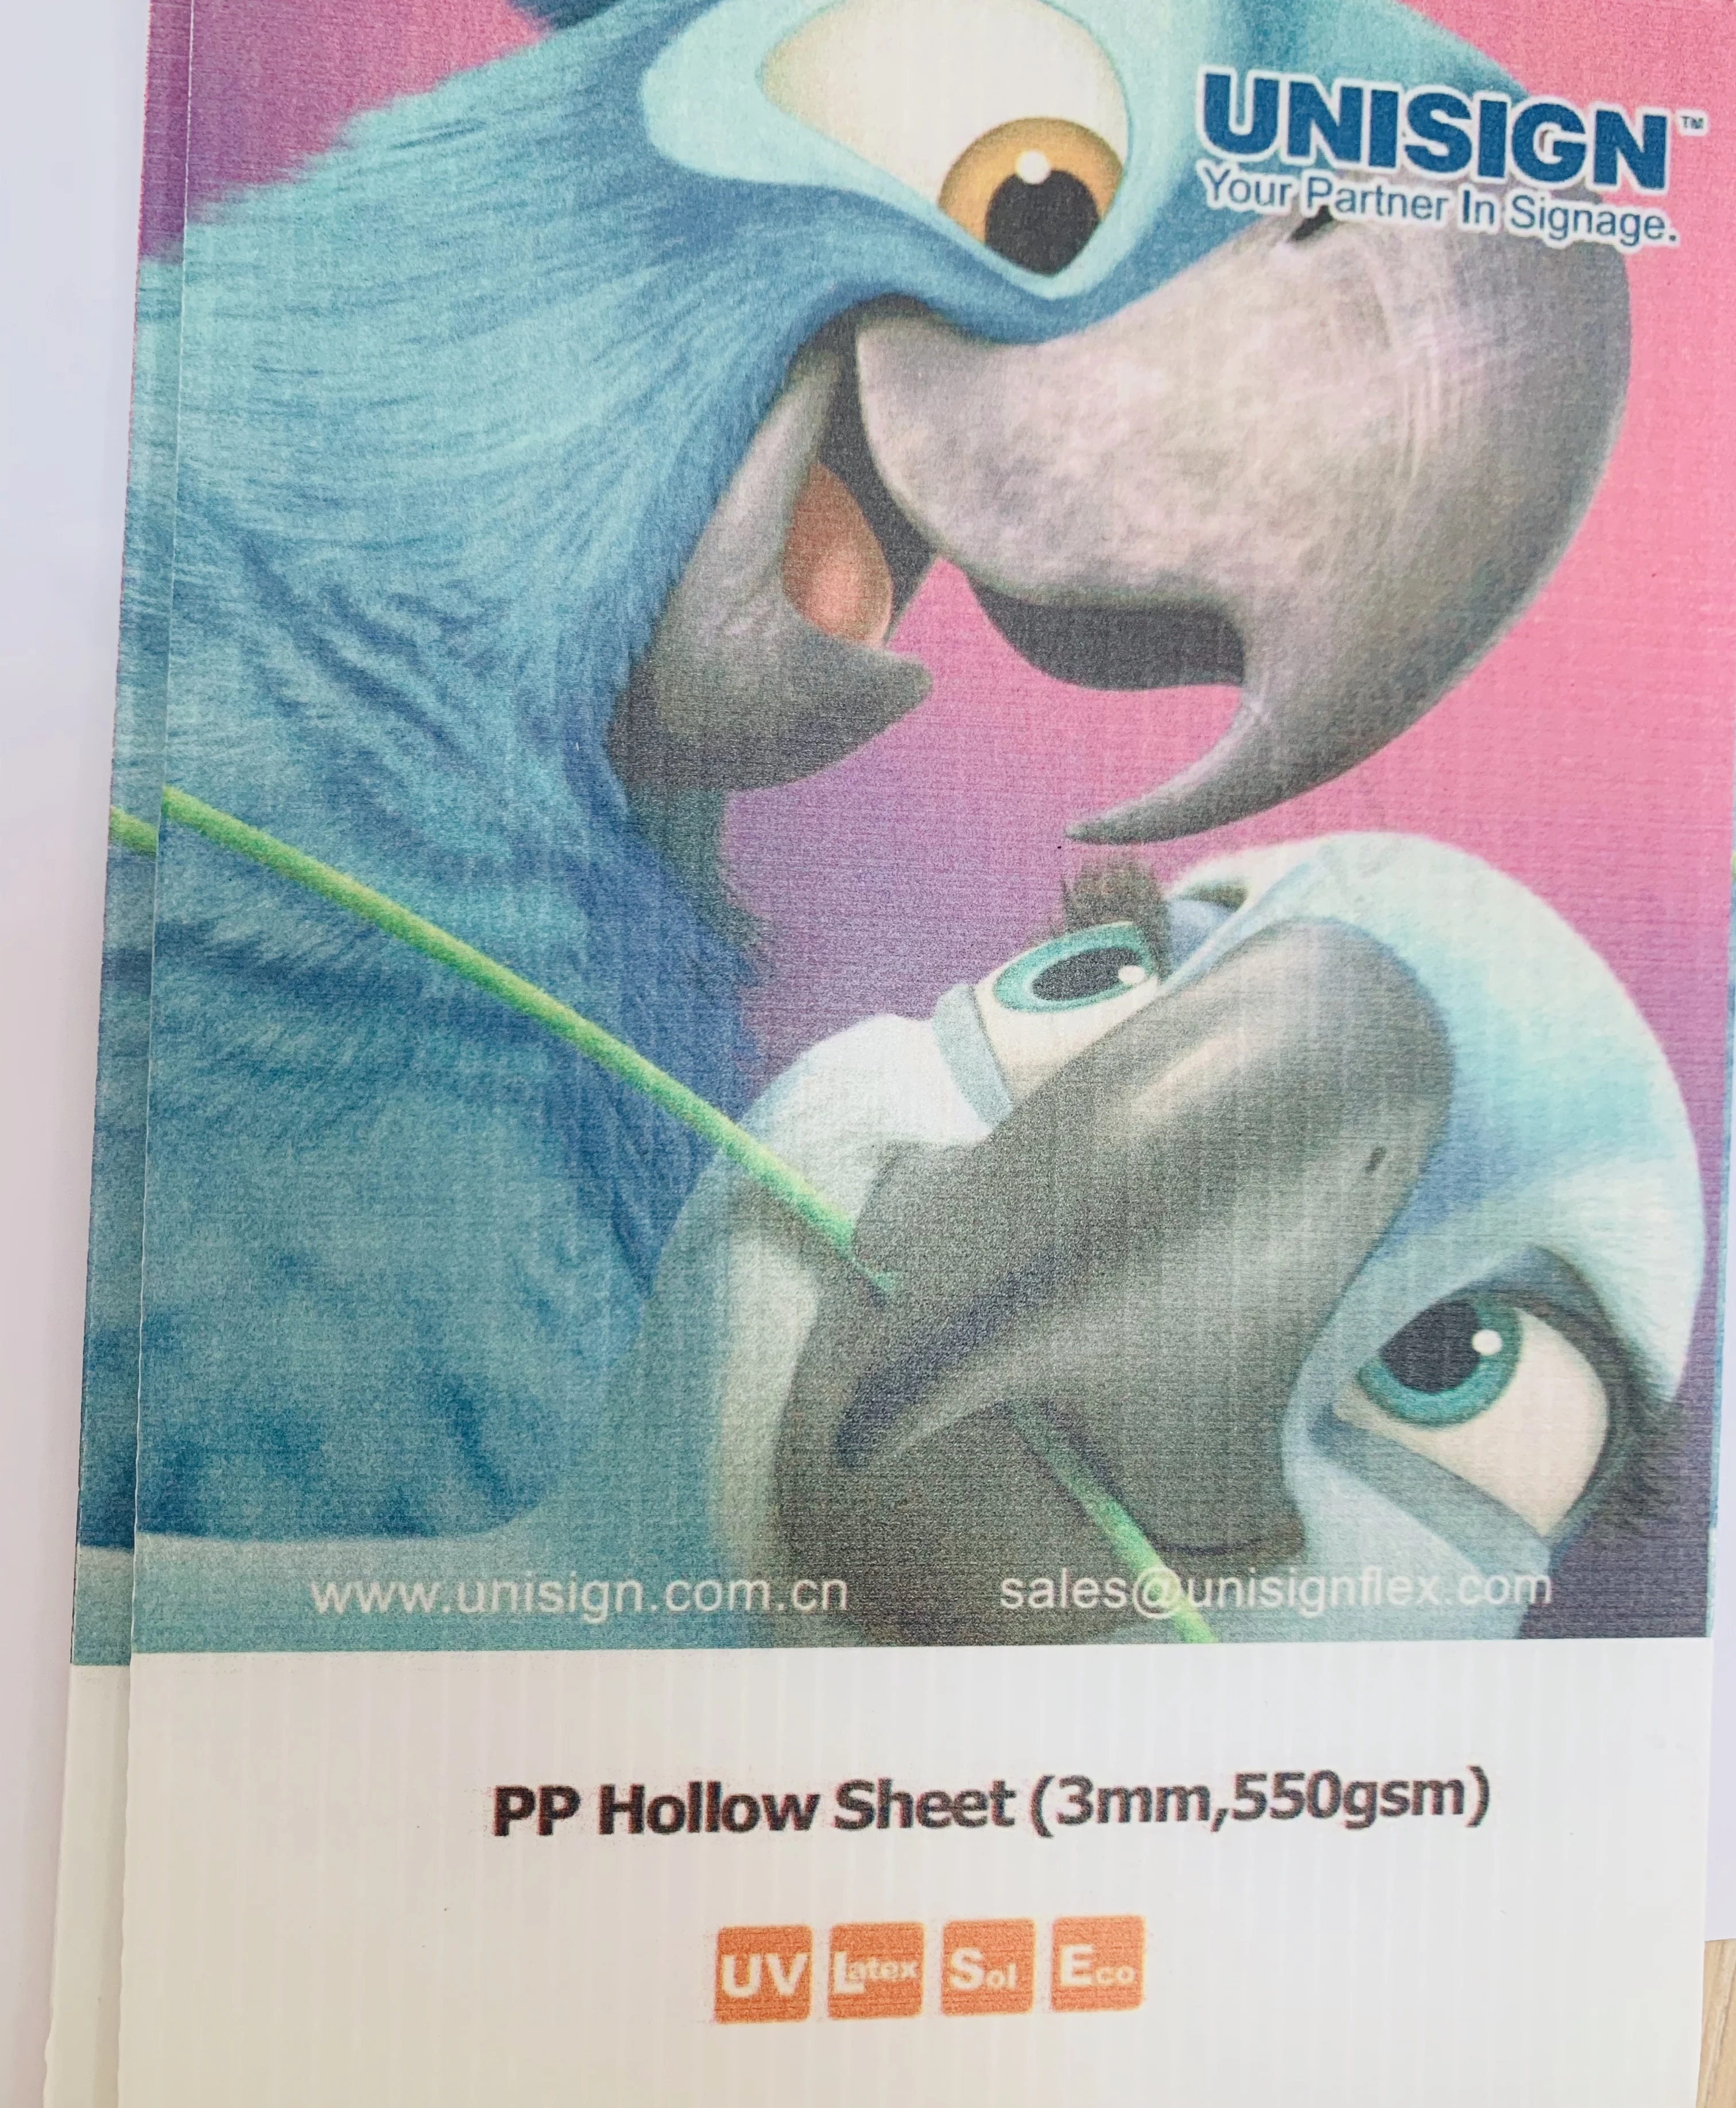 
Unisign pp hollow sheet Carton Plastic for advertisement display, surface protection, logistics packaging 